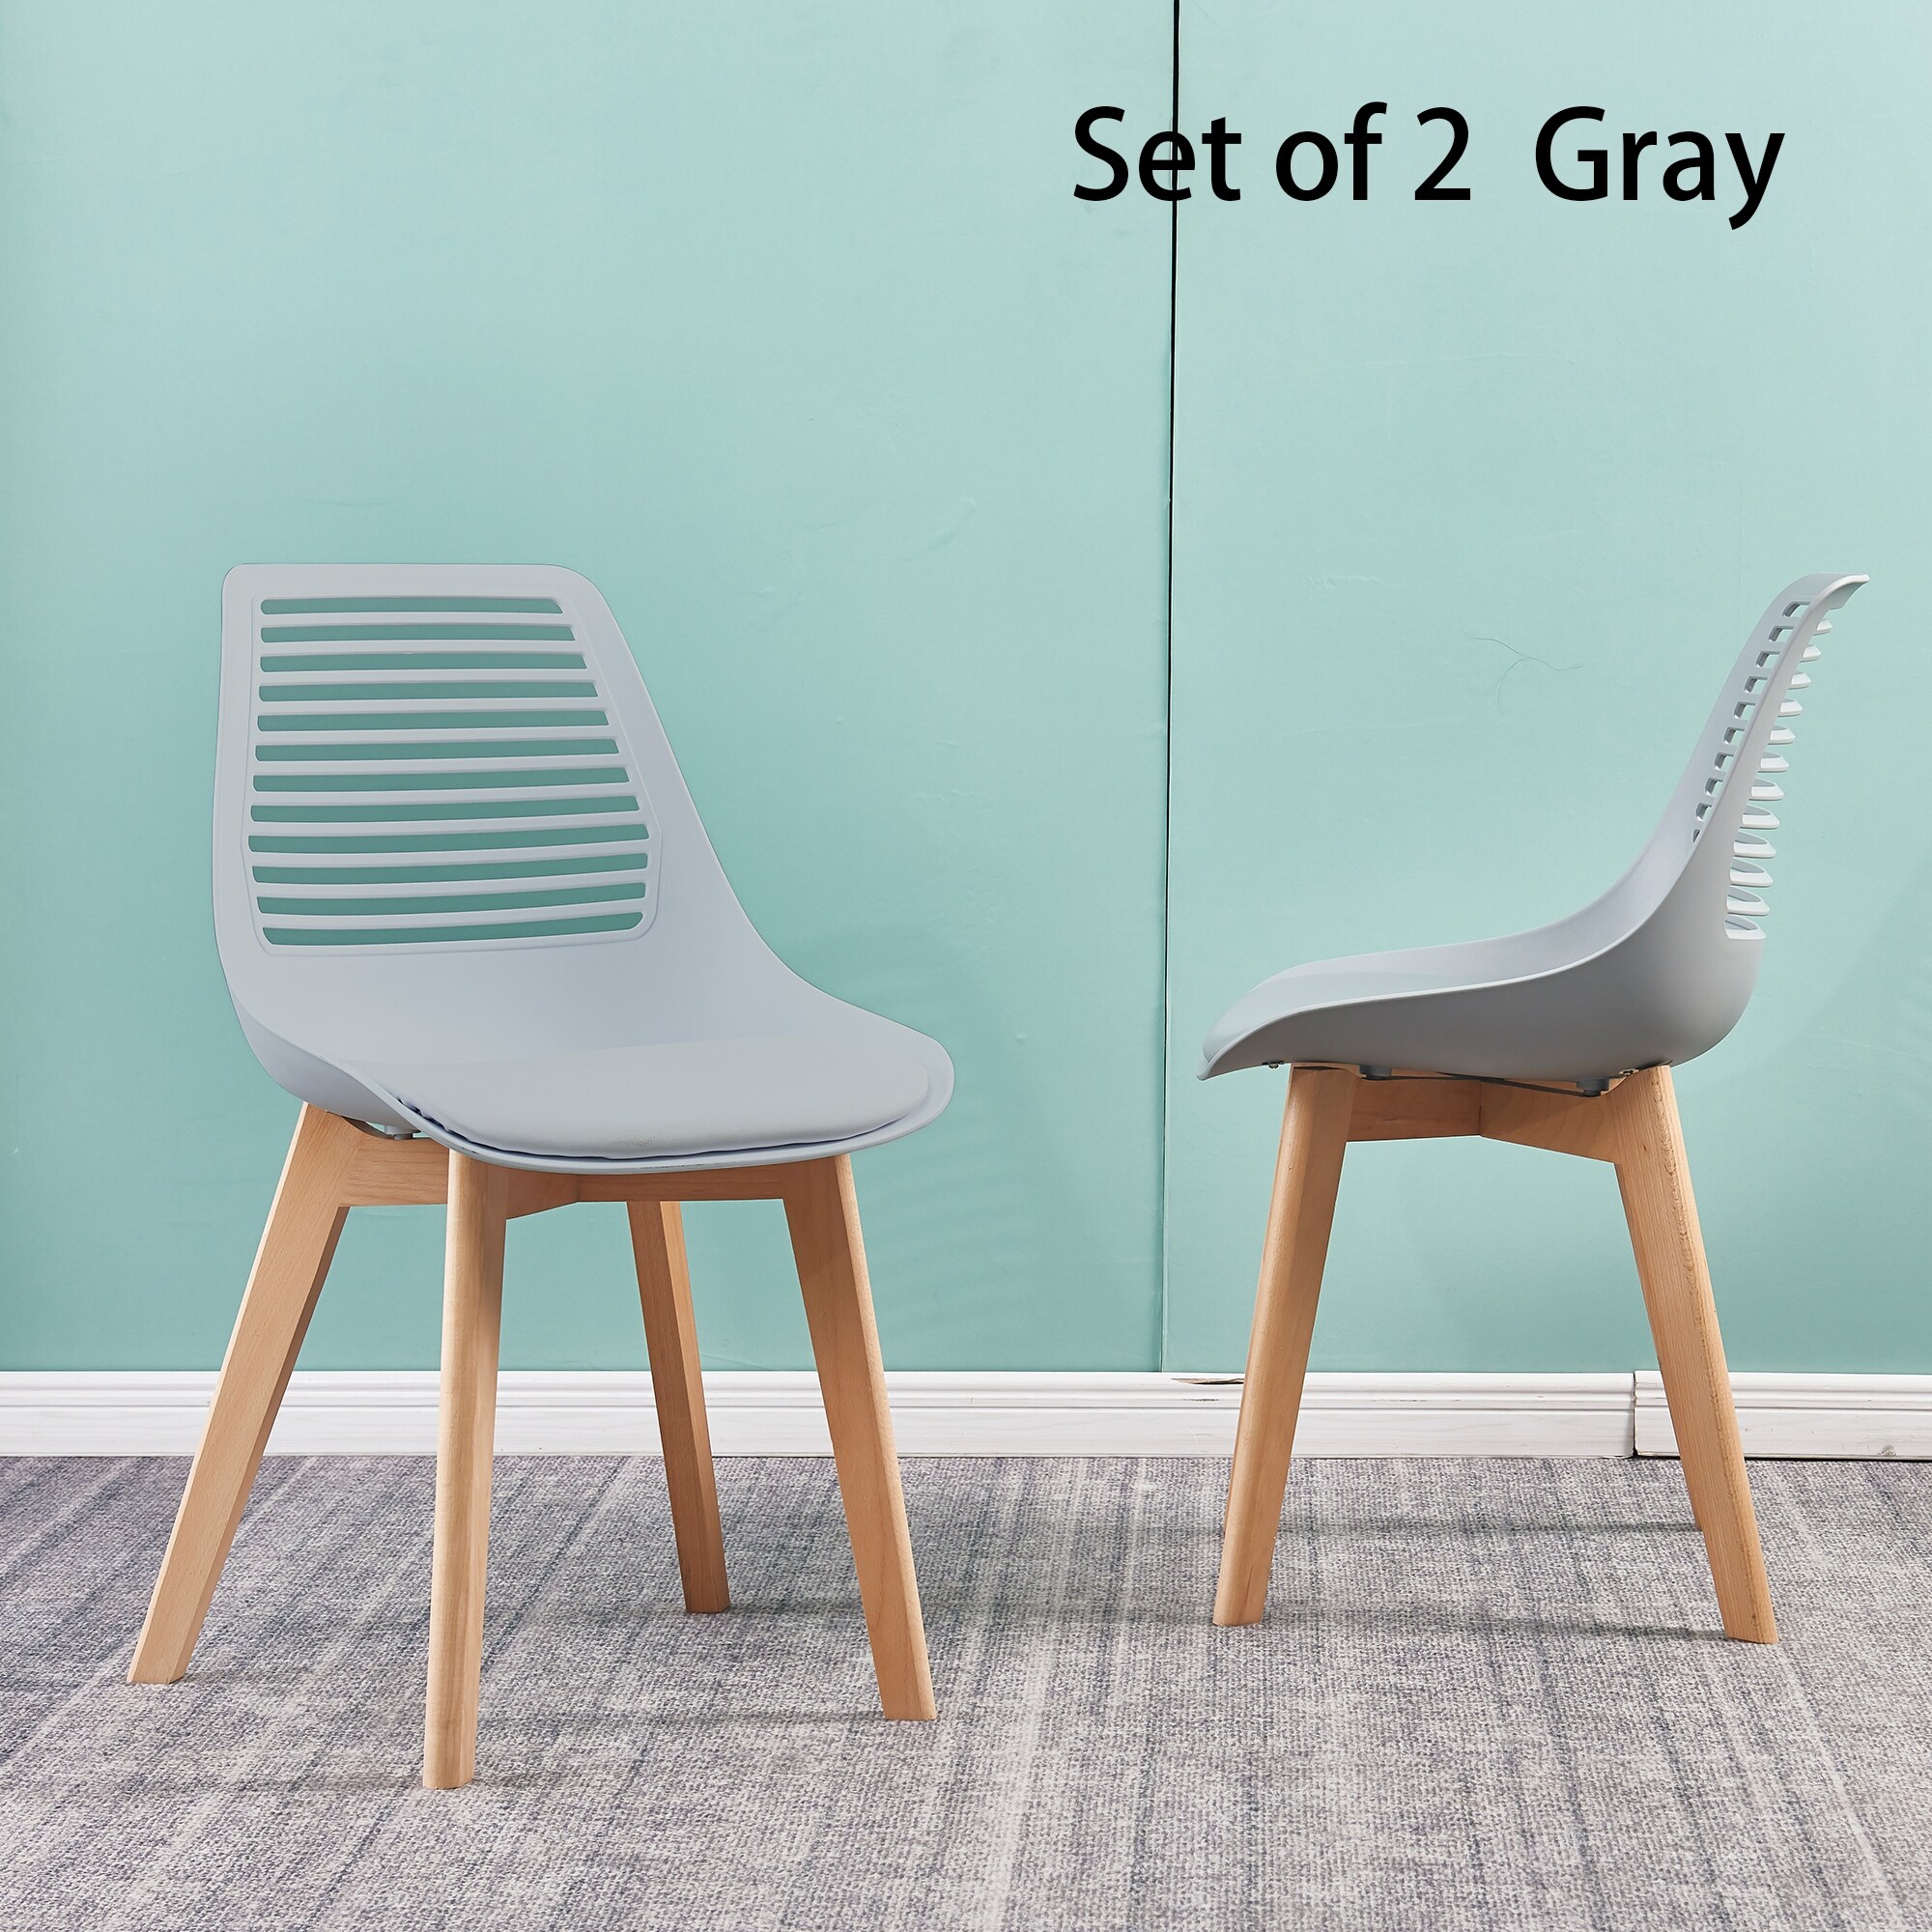 Solid Wood Wood Outdoor Dining Chair (Set of 2) - Grey